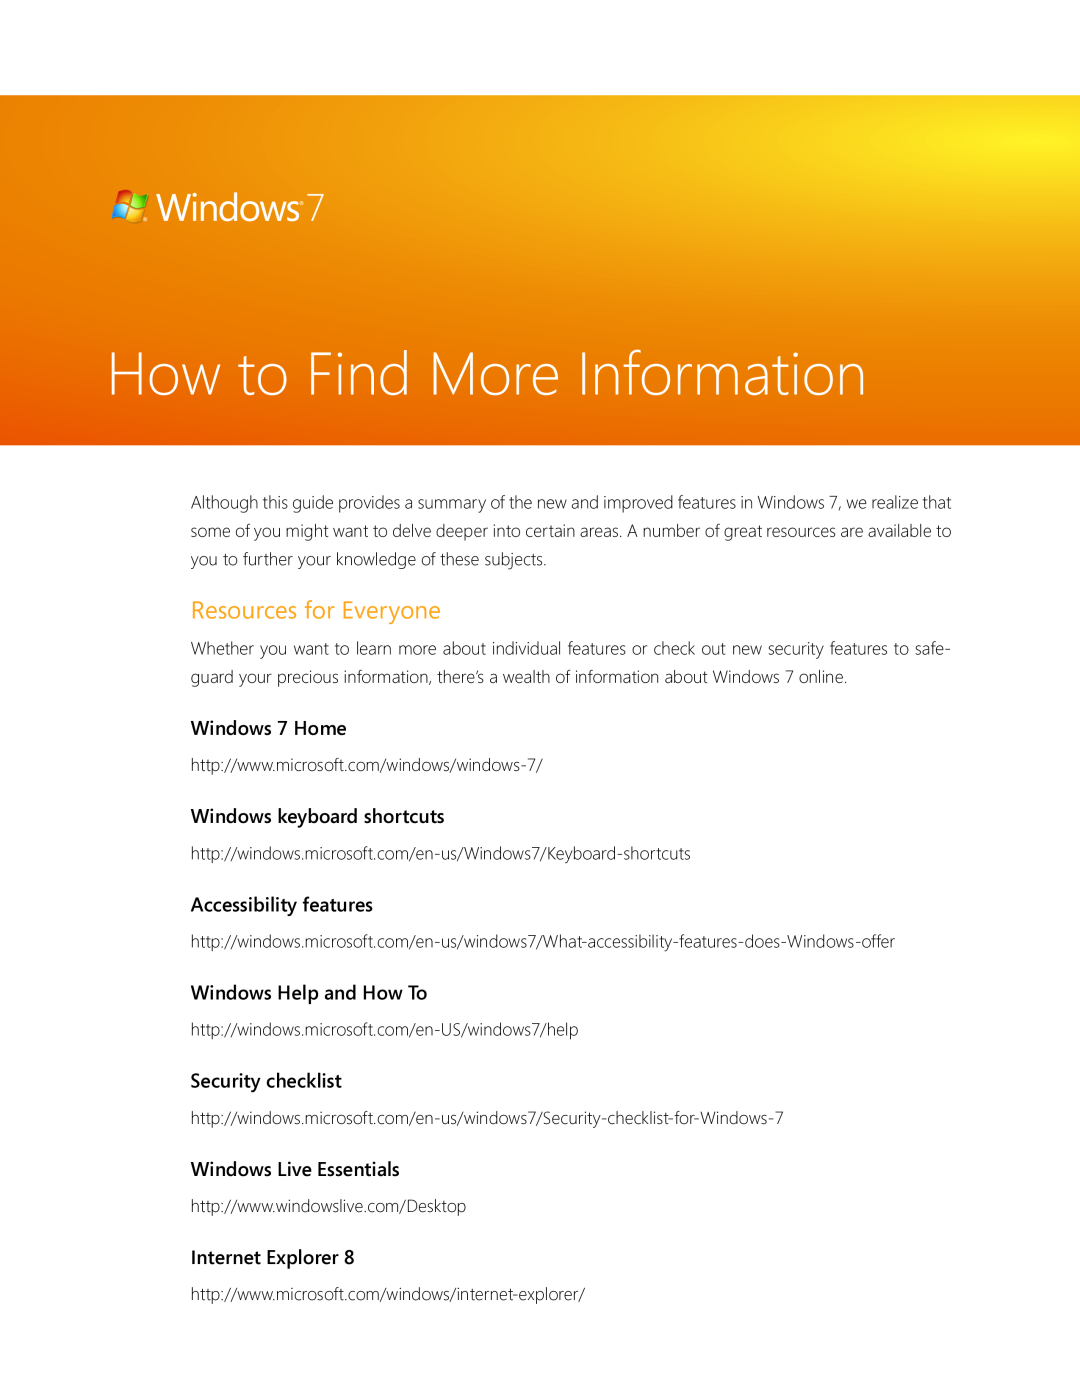 Microsoft GFC-02050 manual How to Find More Information, Resources for Everyone, Windows 7 Home, Windows keyboard shortcuts 